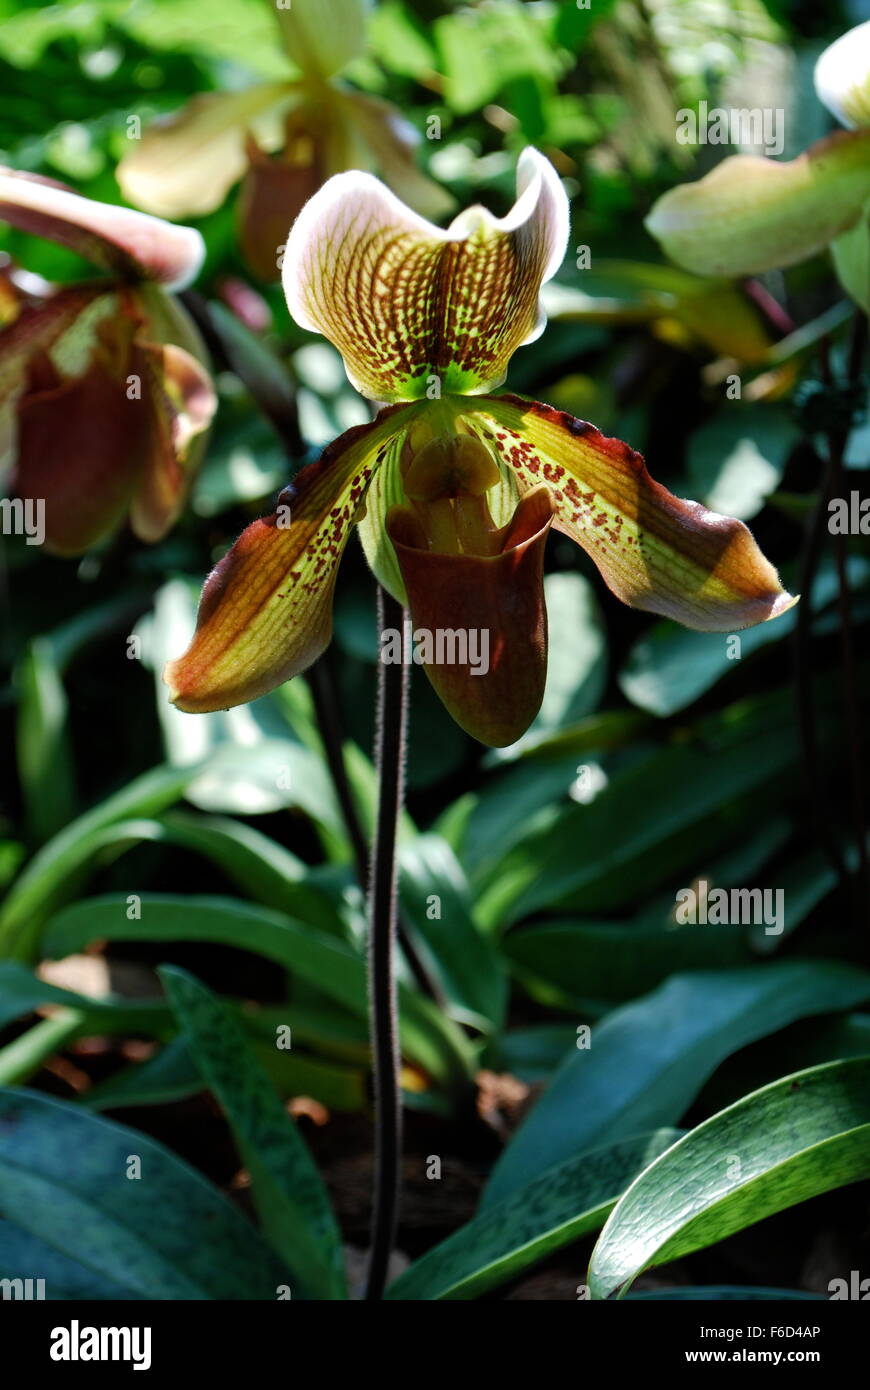 A Lady Slipper Orchid in Singapore Botanic Garden Stock Photo